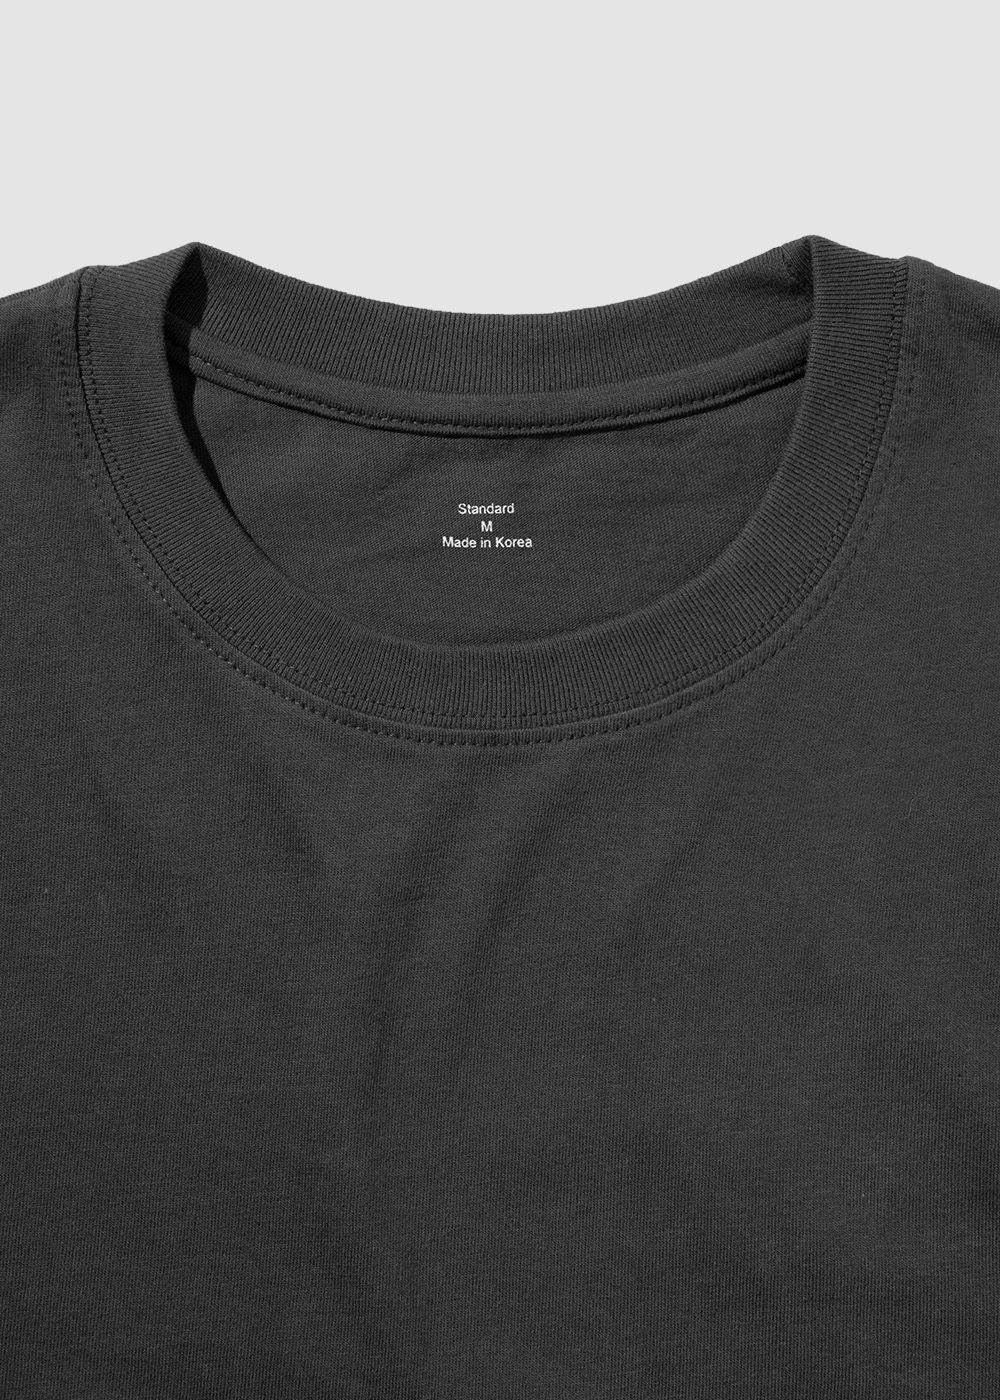 D. Tumbled Carded Cotton 100% 20/1 Single T-shirt _ charcoal